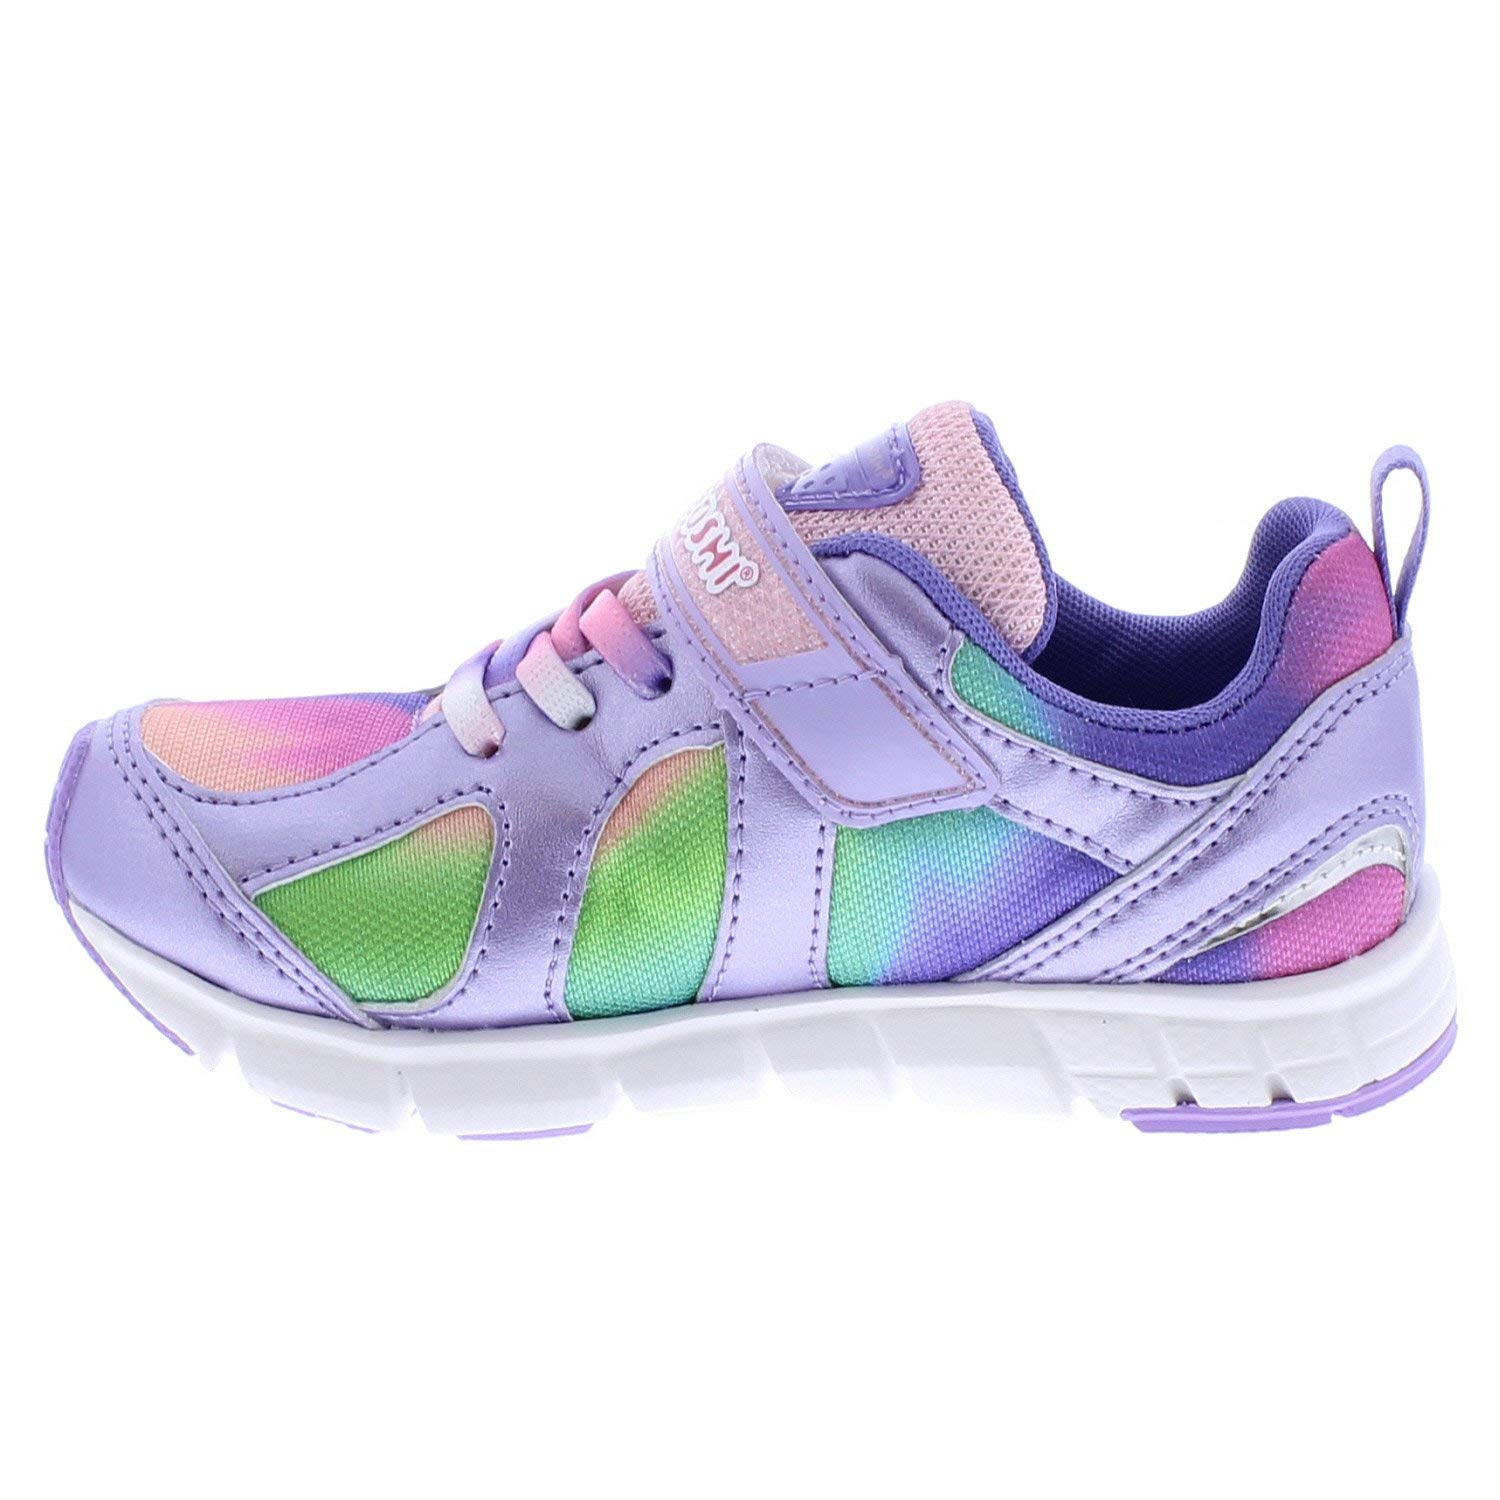 TSUKIHOSHI 3584 Rainbow Strap-Closure Machine-Washable Youth Sneaker Shoe with Wide Toe Box and Slip-Resistant, Non-Marking Outsole - for Little Kids and Big Kids, Ages 4-12